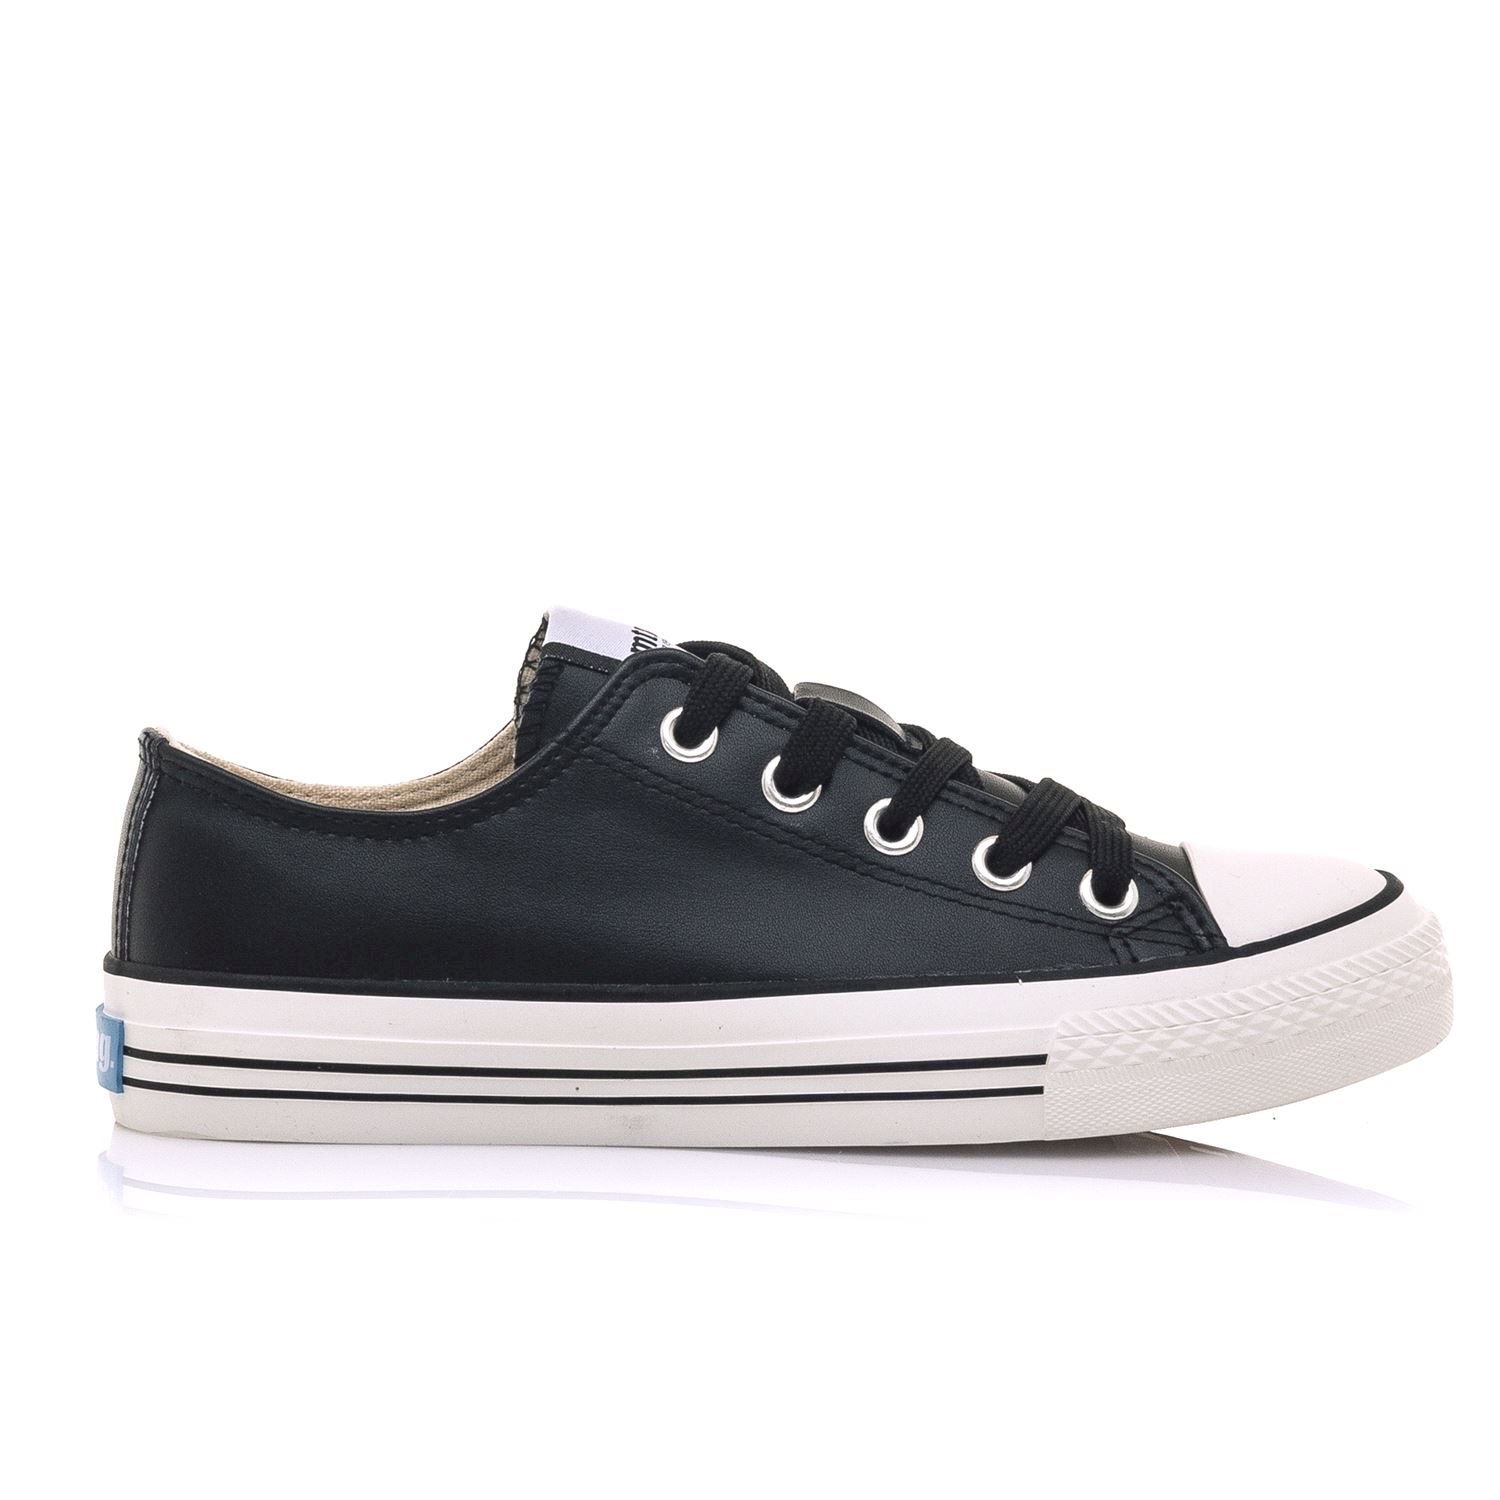 Sneakers Mulher Mtng Remix Preto - negro-mate - 